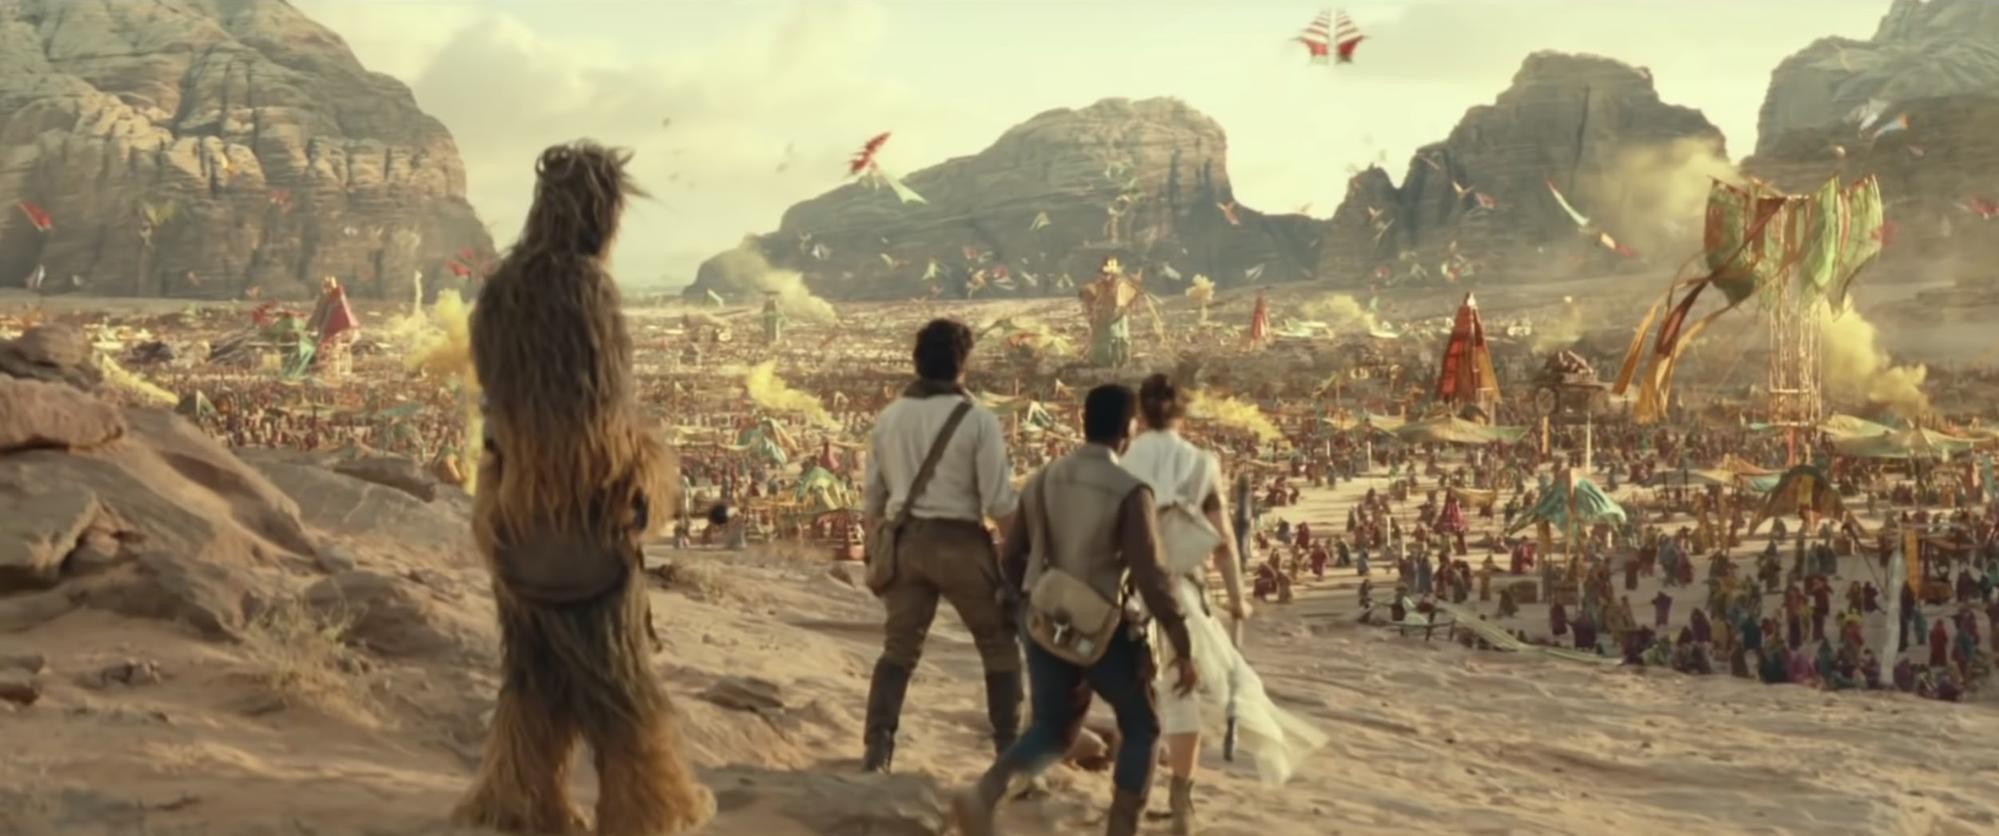 the Rise of Skywalker': 'Star Wars' References and Easter Eggs